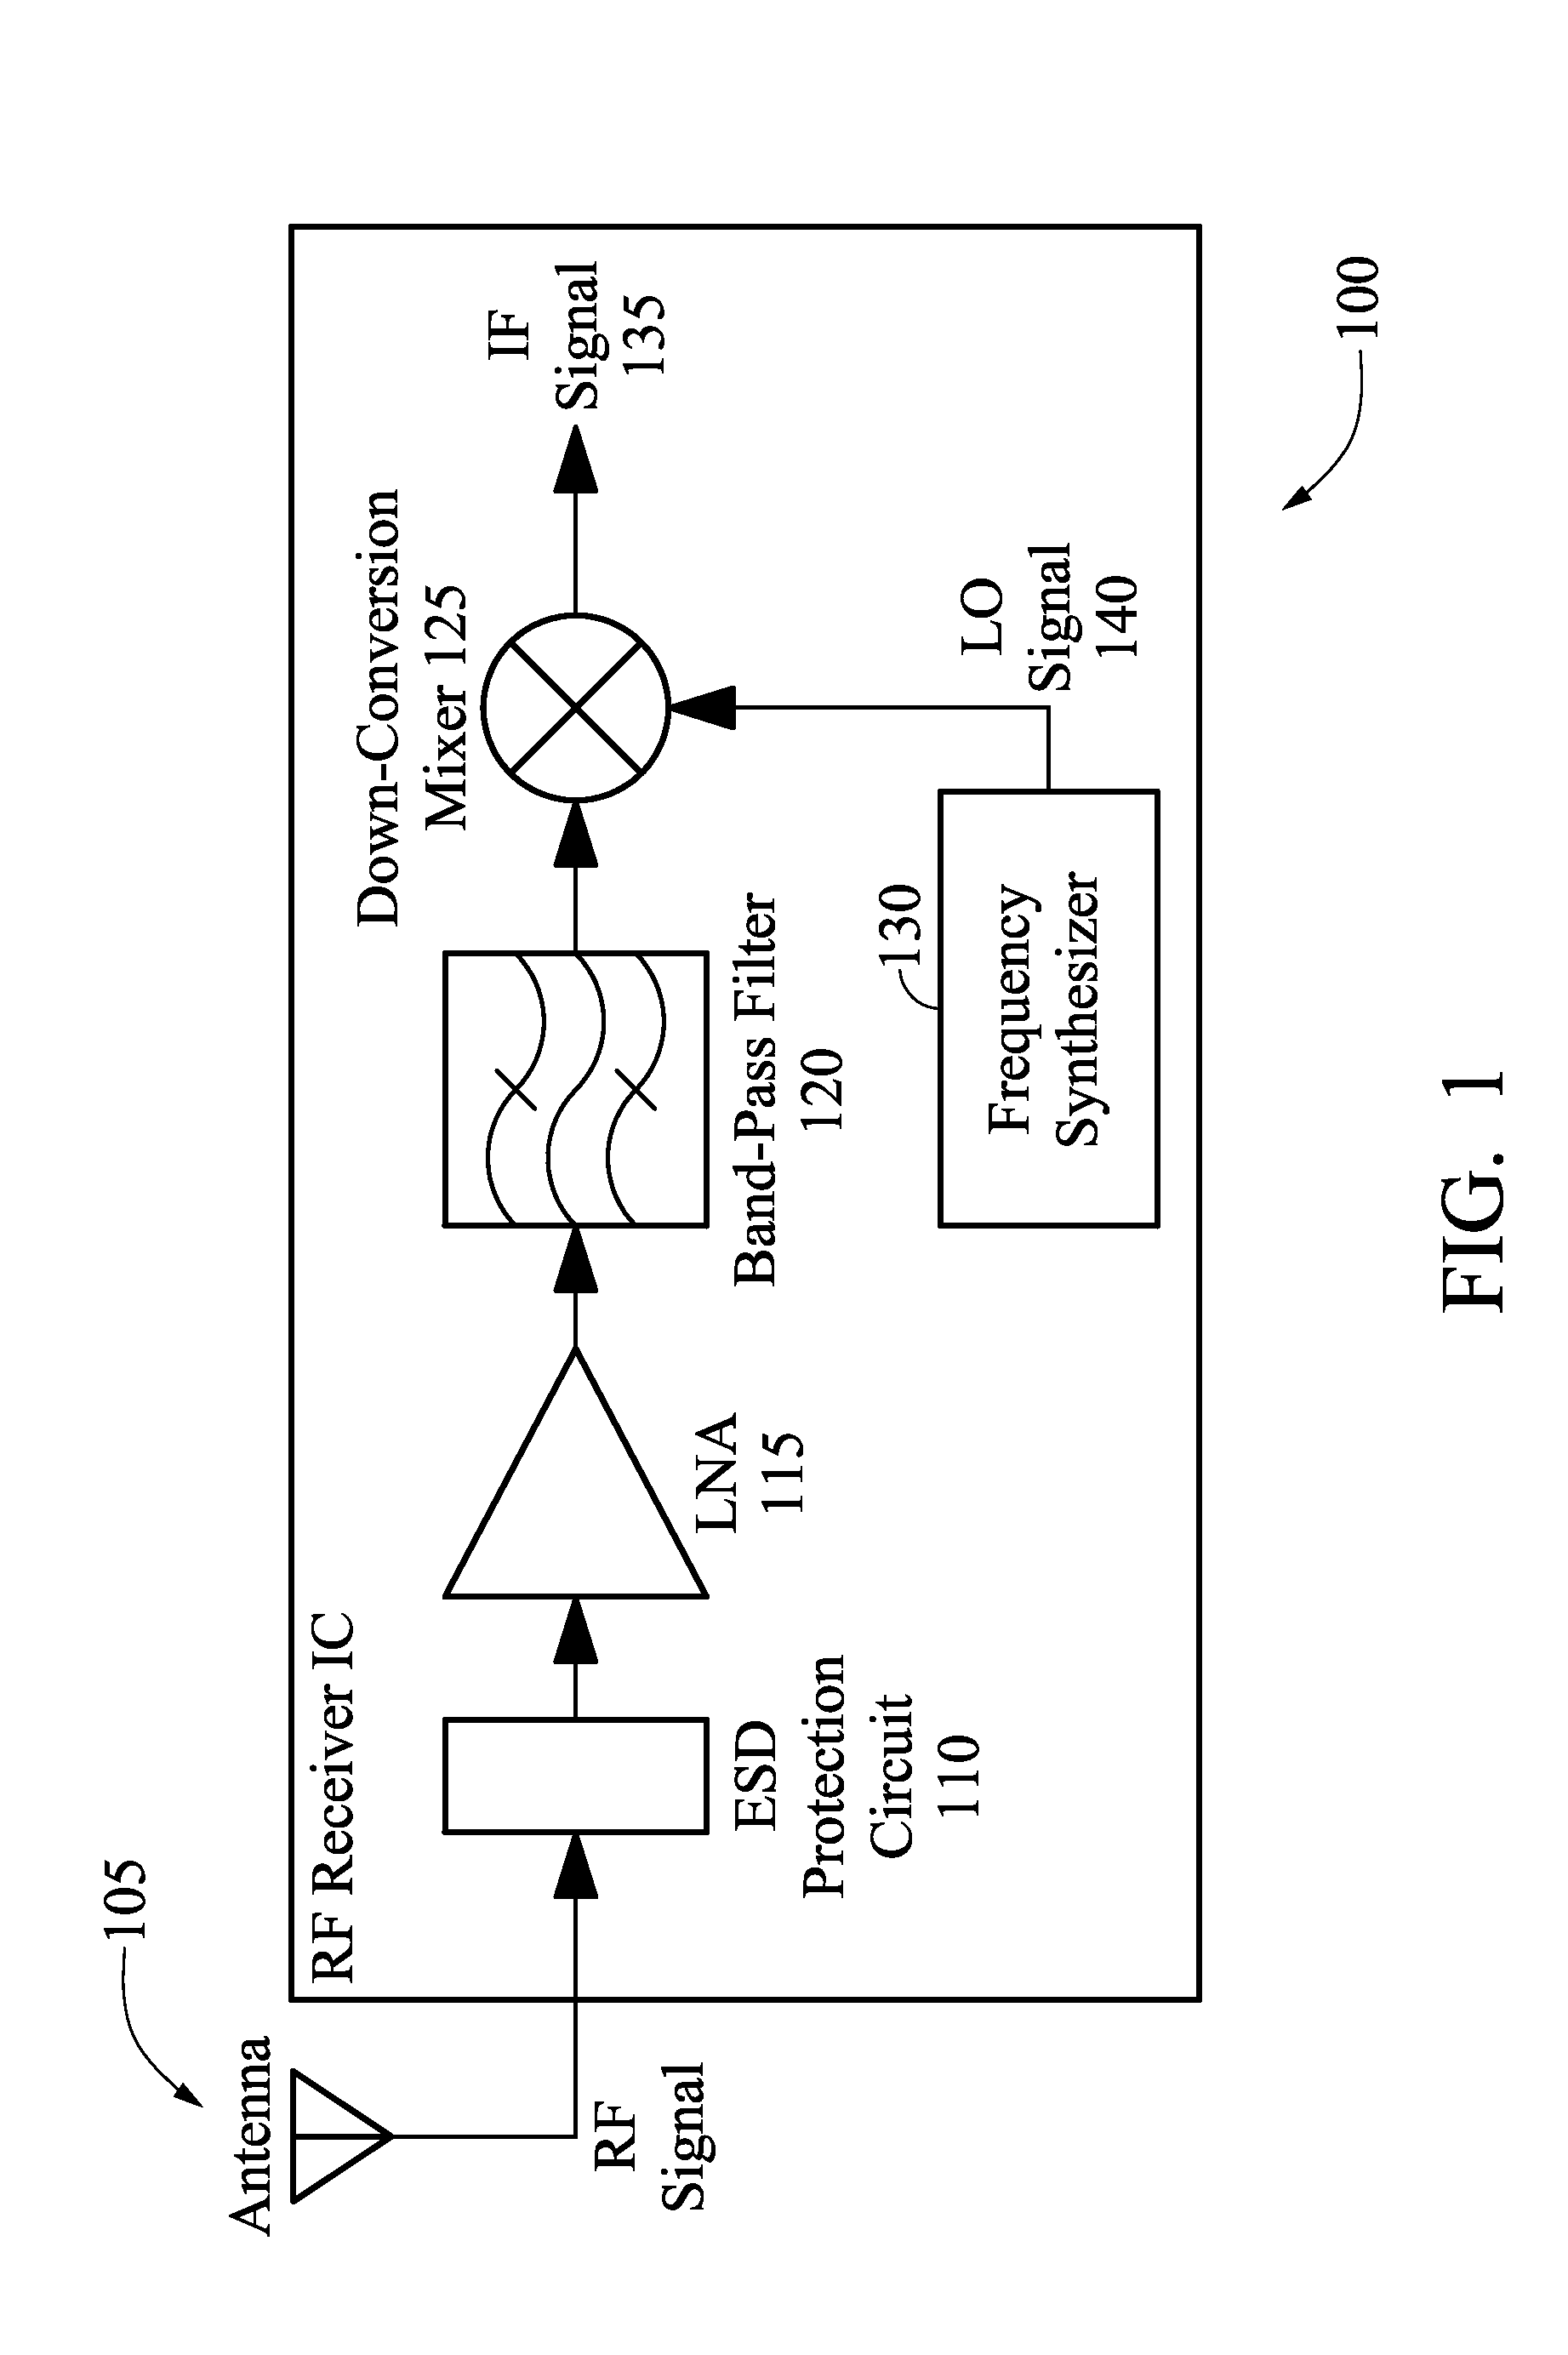 Electrostatic discharge circuit using inductor-triggered silicon-controlled rectifier